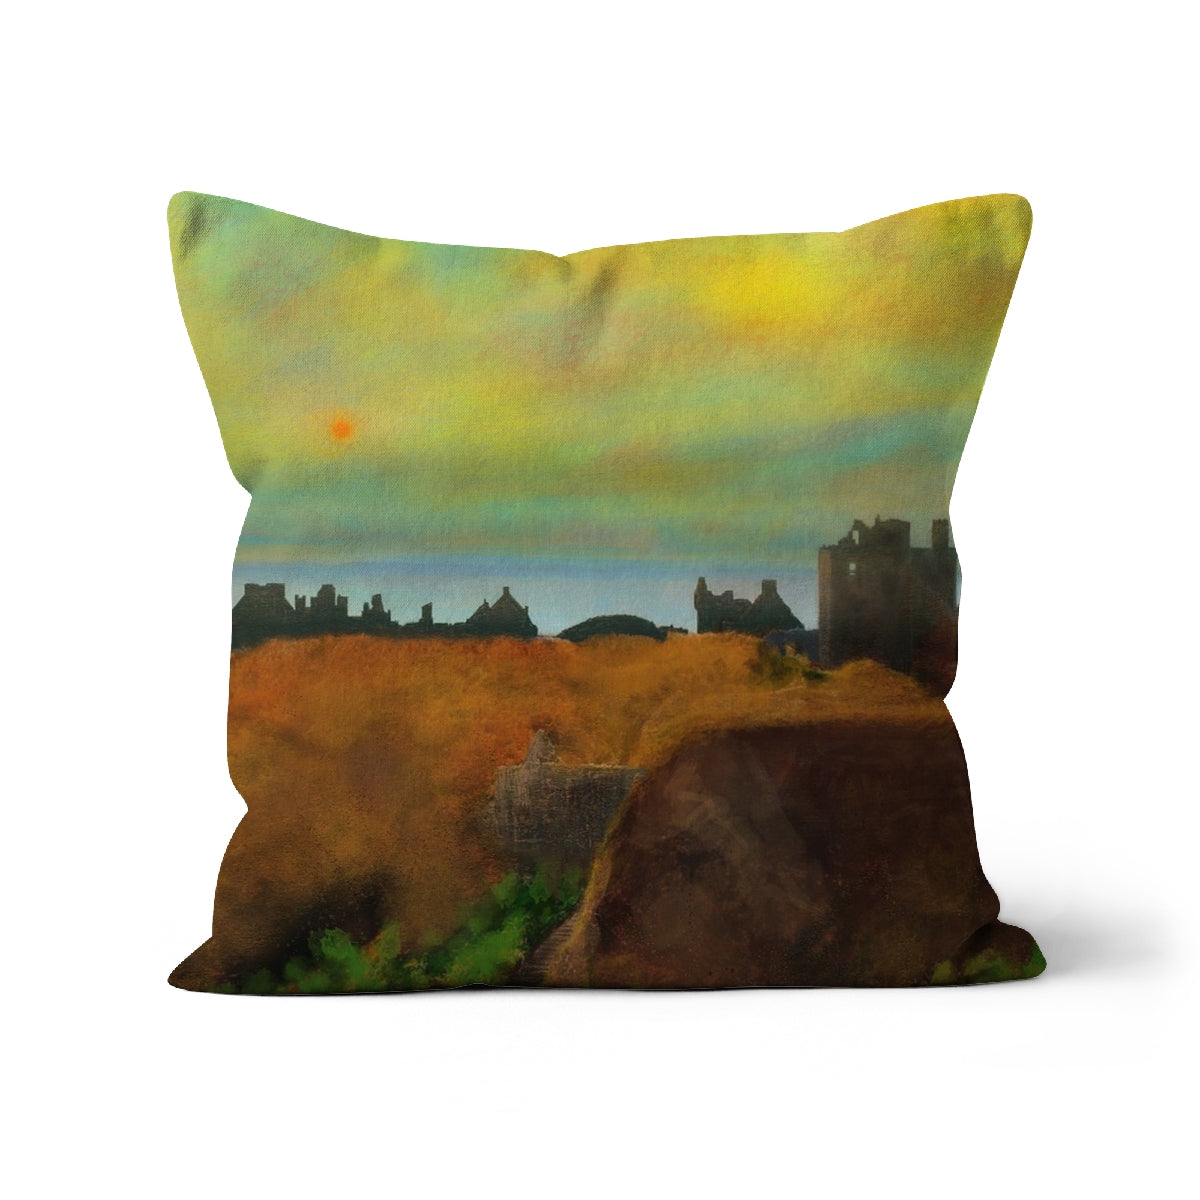 Dunnottar Castle Art Gifts Cushion-Cushions-Historic & Iconic Scotland Art Gallery-Linen-24"x24"-Paintings, Prints, Homeware, Art Gifts From Scotland By Scottish Artist Kevin Hunter